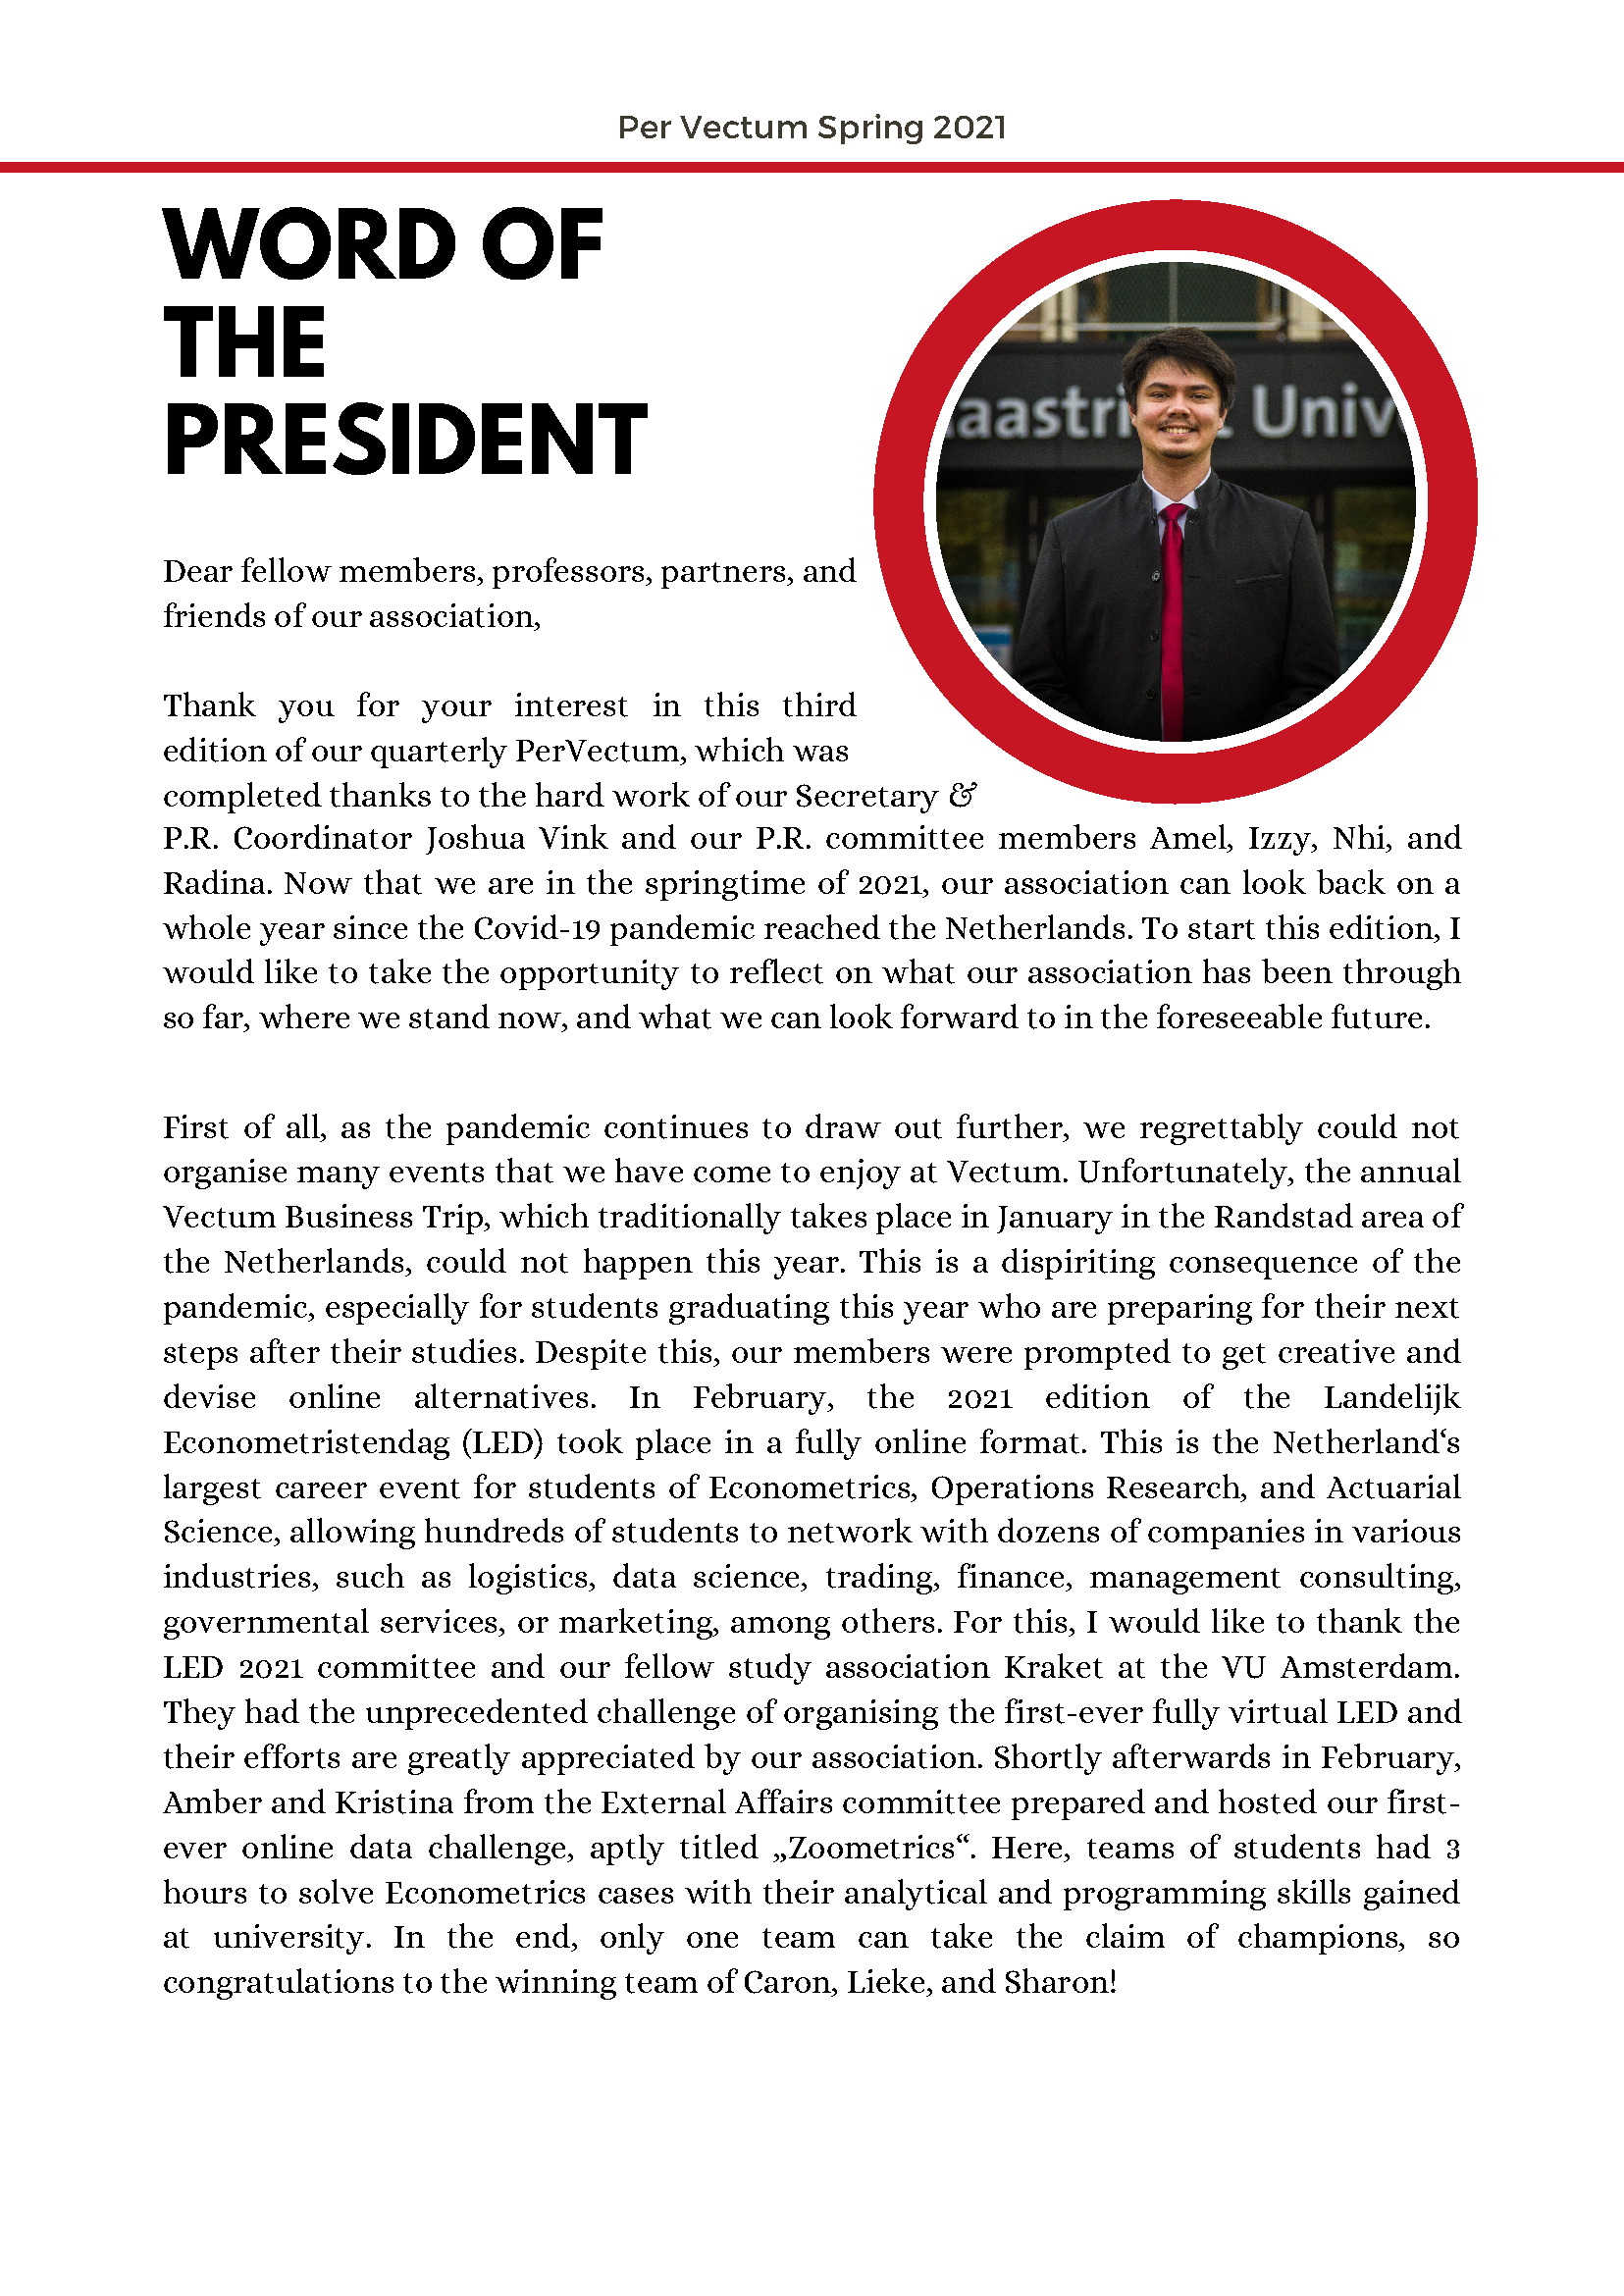 Per Vectum Spring edition 2021 (1)_Page_03.png